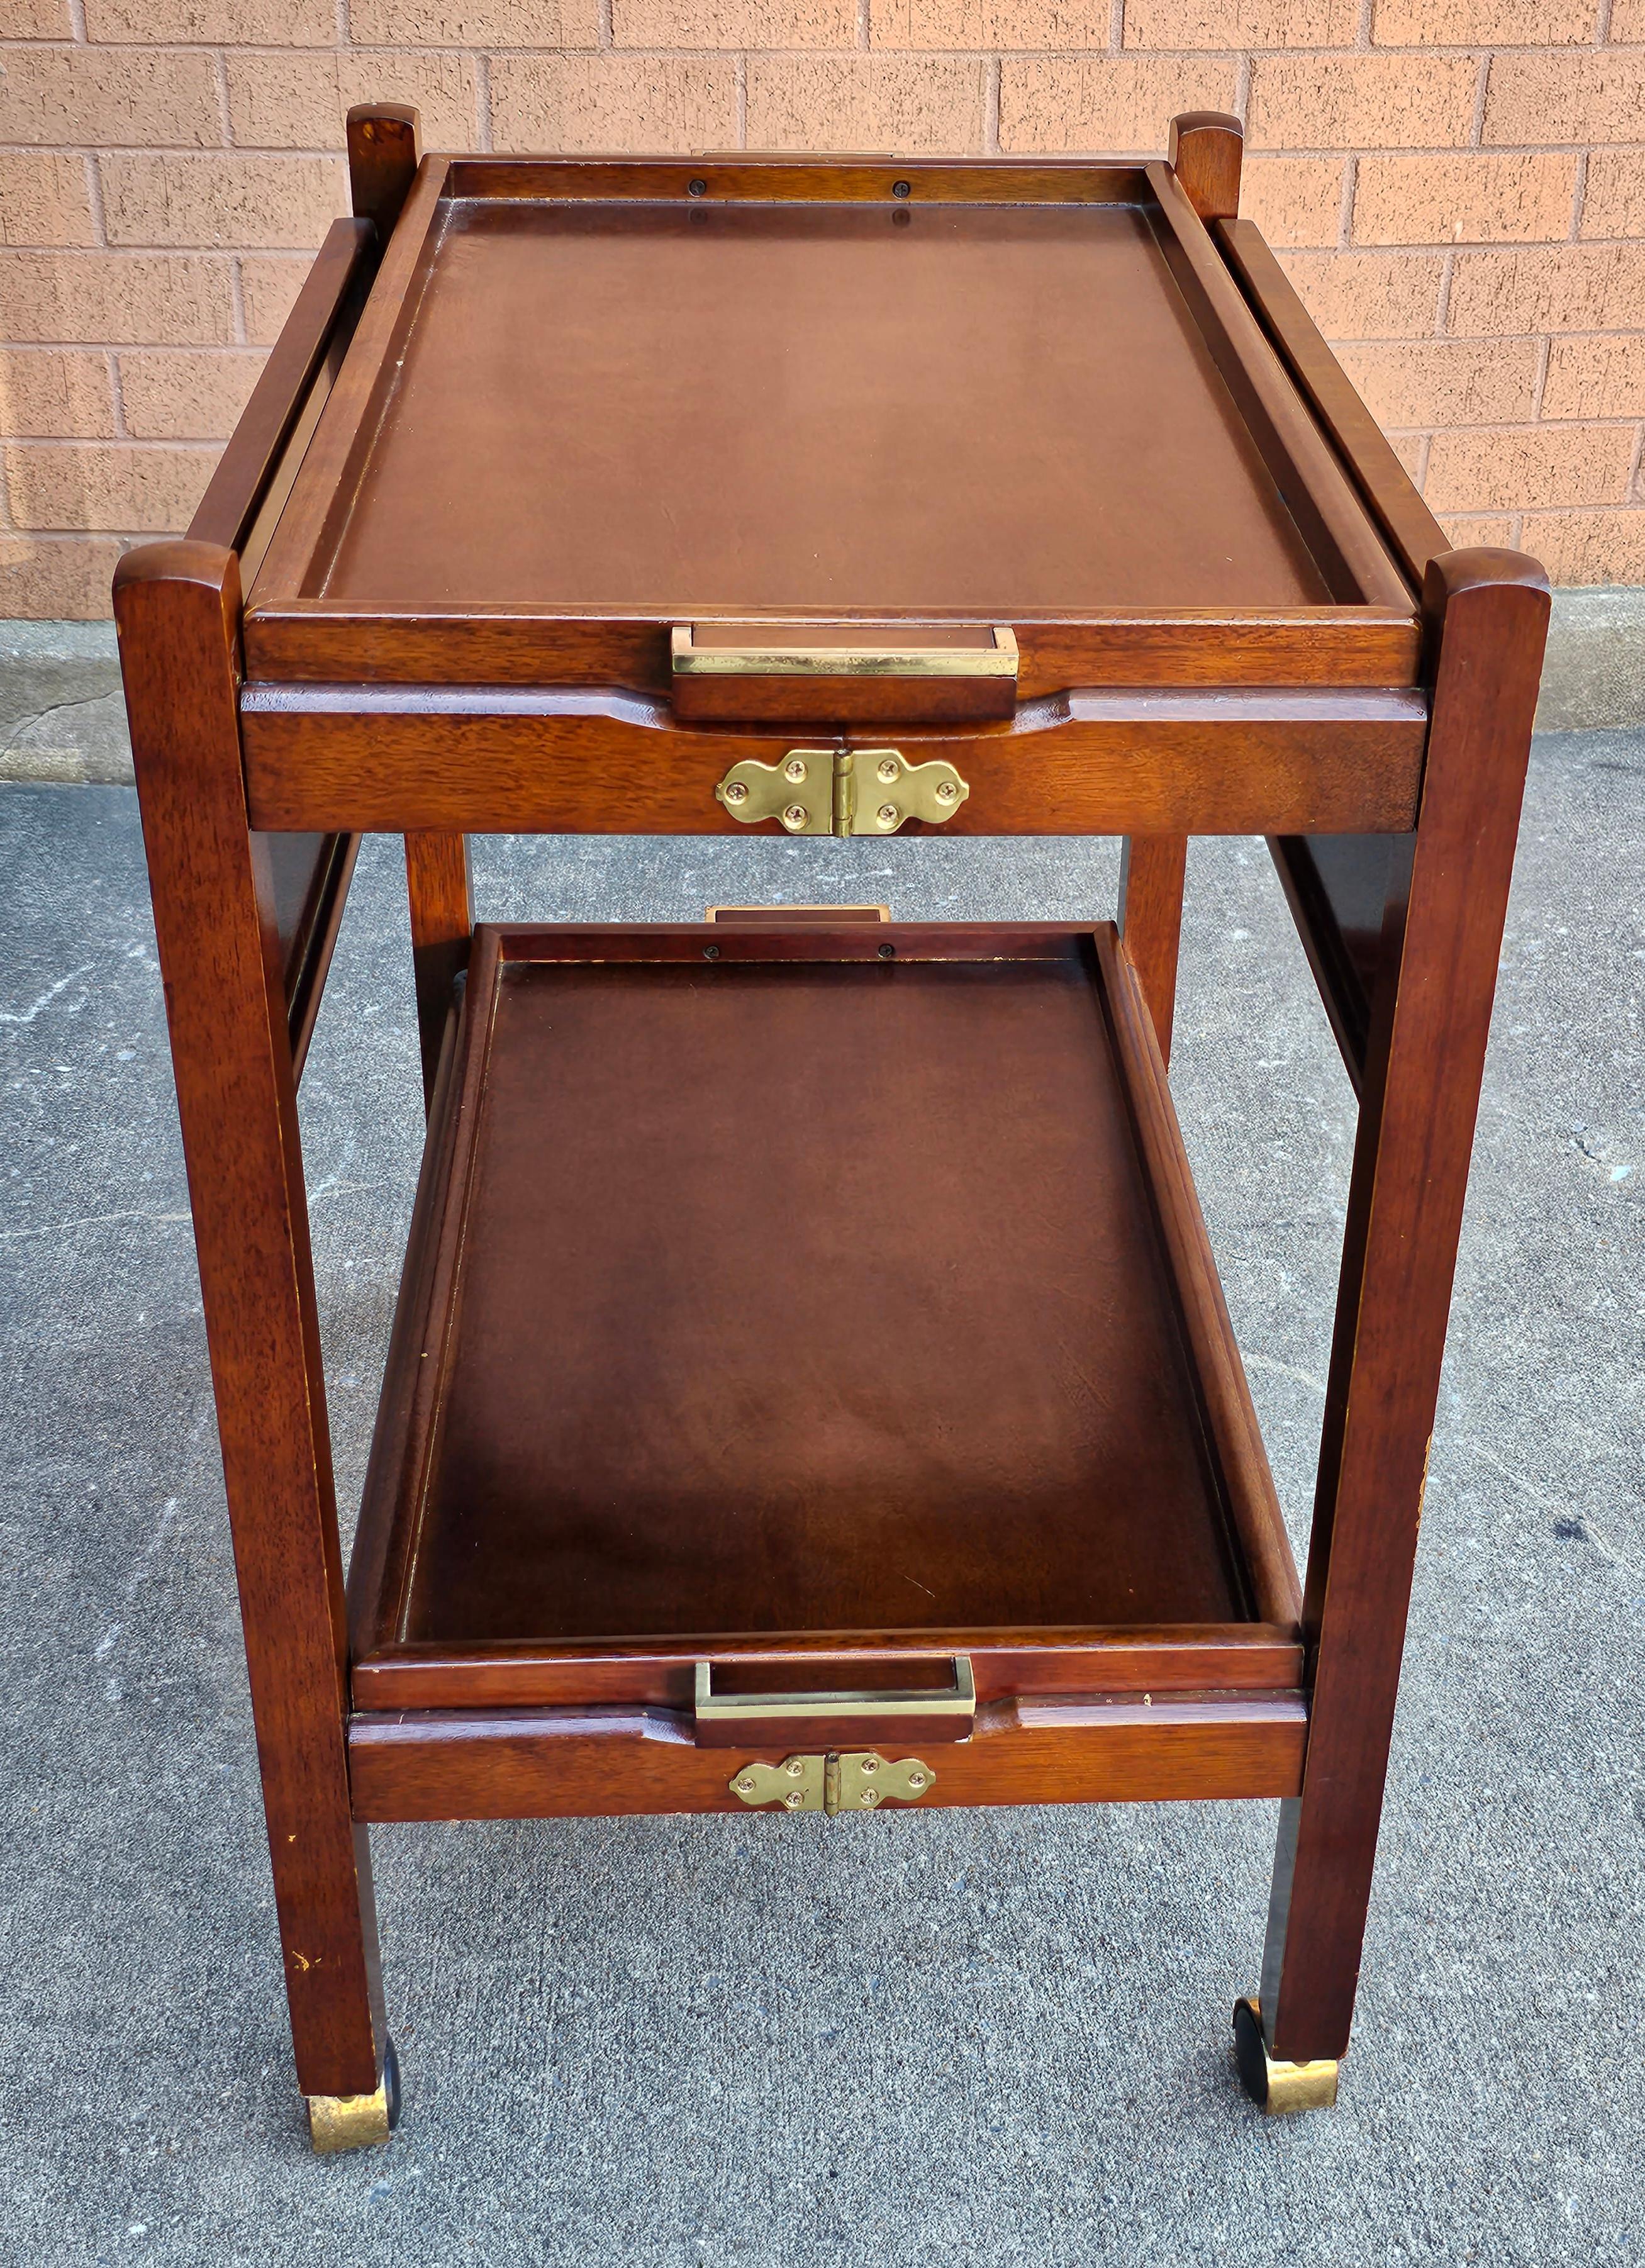 Scandinavian Modern Style Two-Tier Fold-Up Rolling Bar Cart with Removable Trays In Good Condition For Sale In Germantown, MD